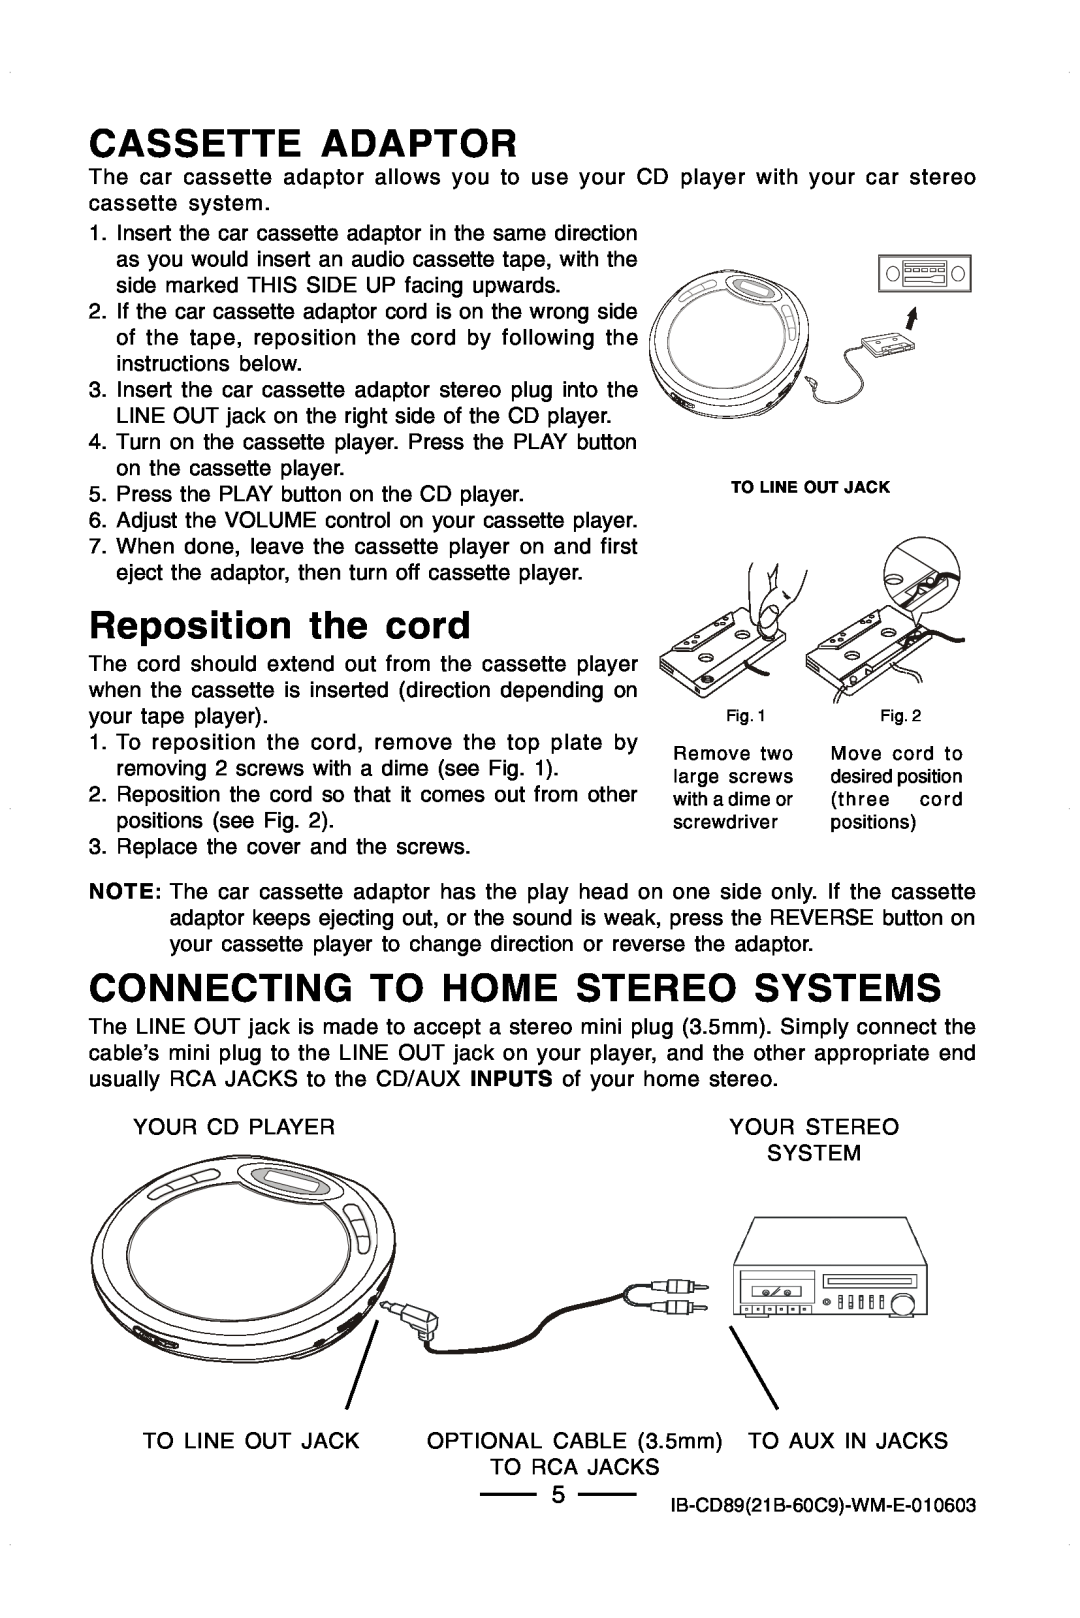 Lenoxx Electronics CD-89 manual Cassette Adaptor, Reposition the cord, Connecting To Home Stereo Systems 